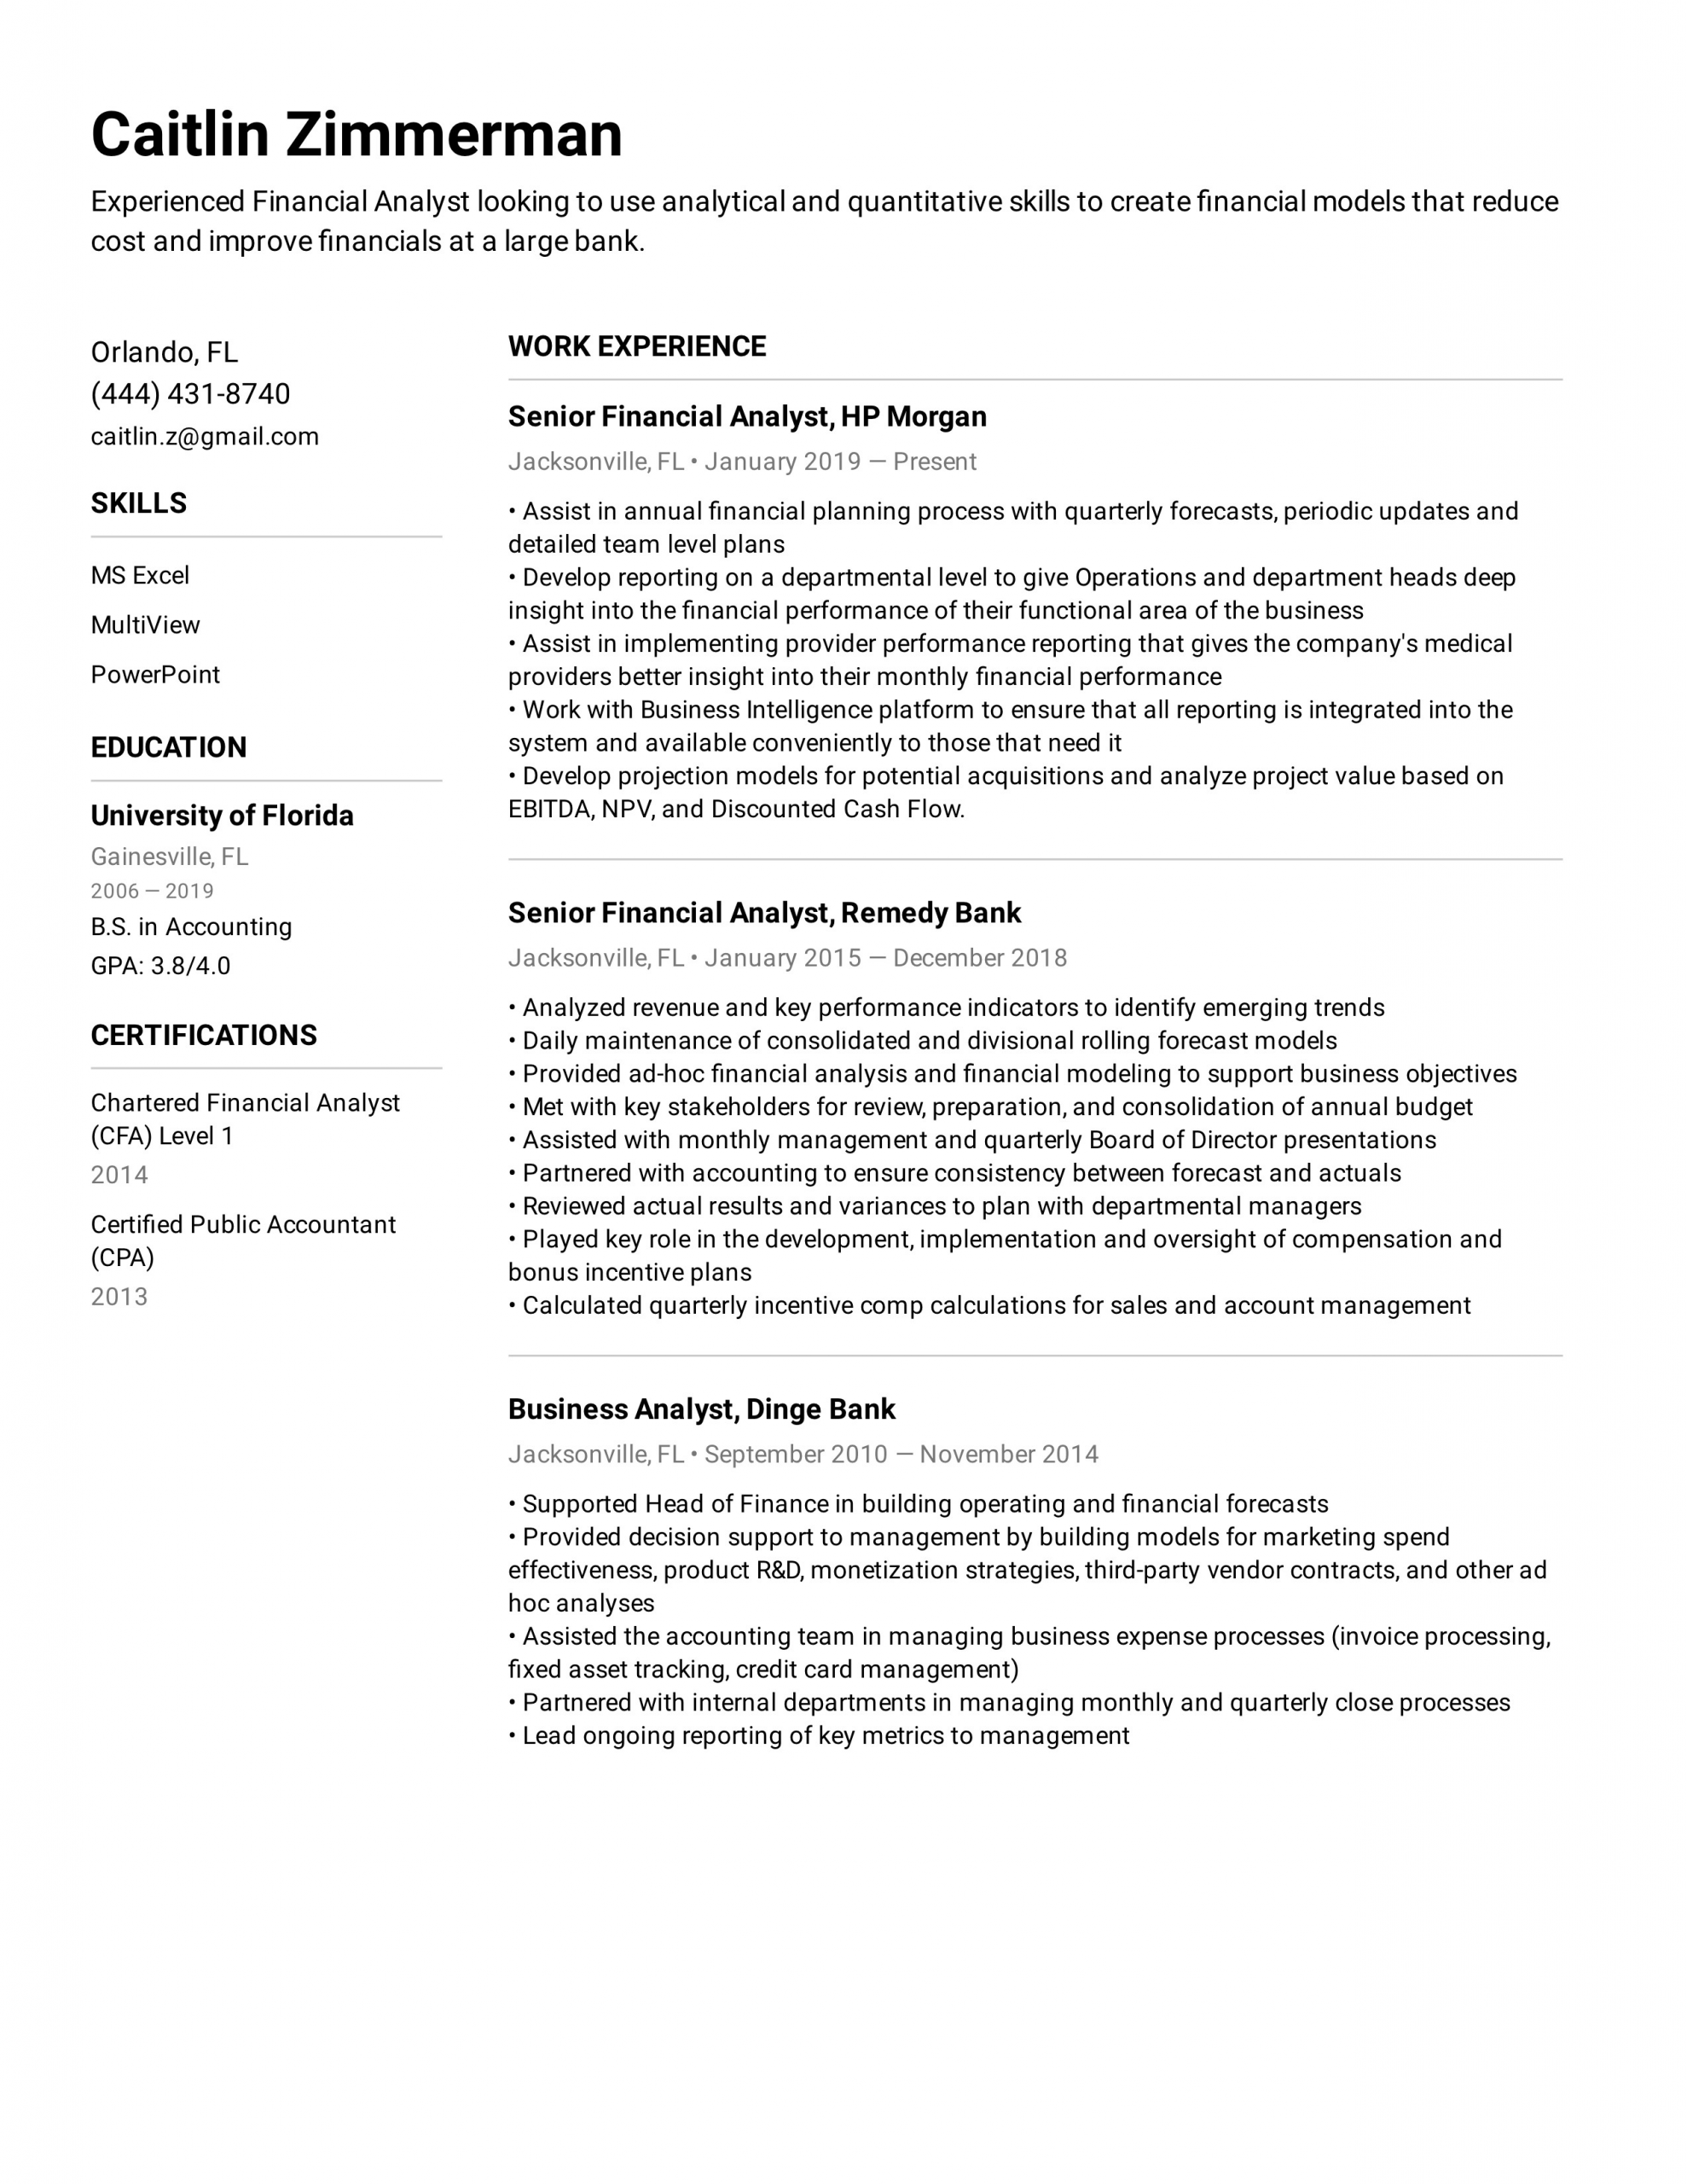 Sample Resume for Financial Analyst Position Financial Analyst Resume Example & Writing Tips for 2021